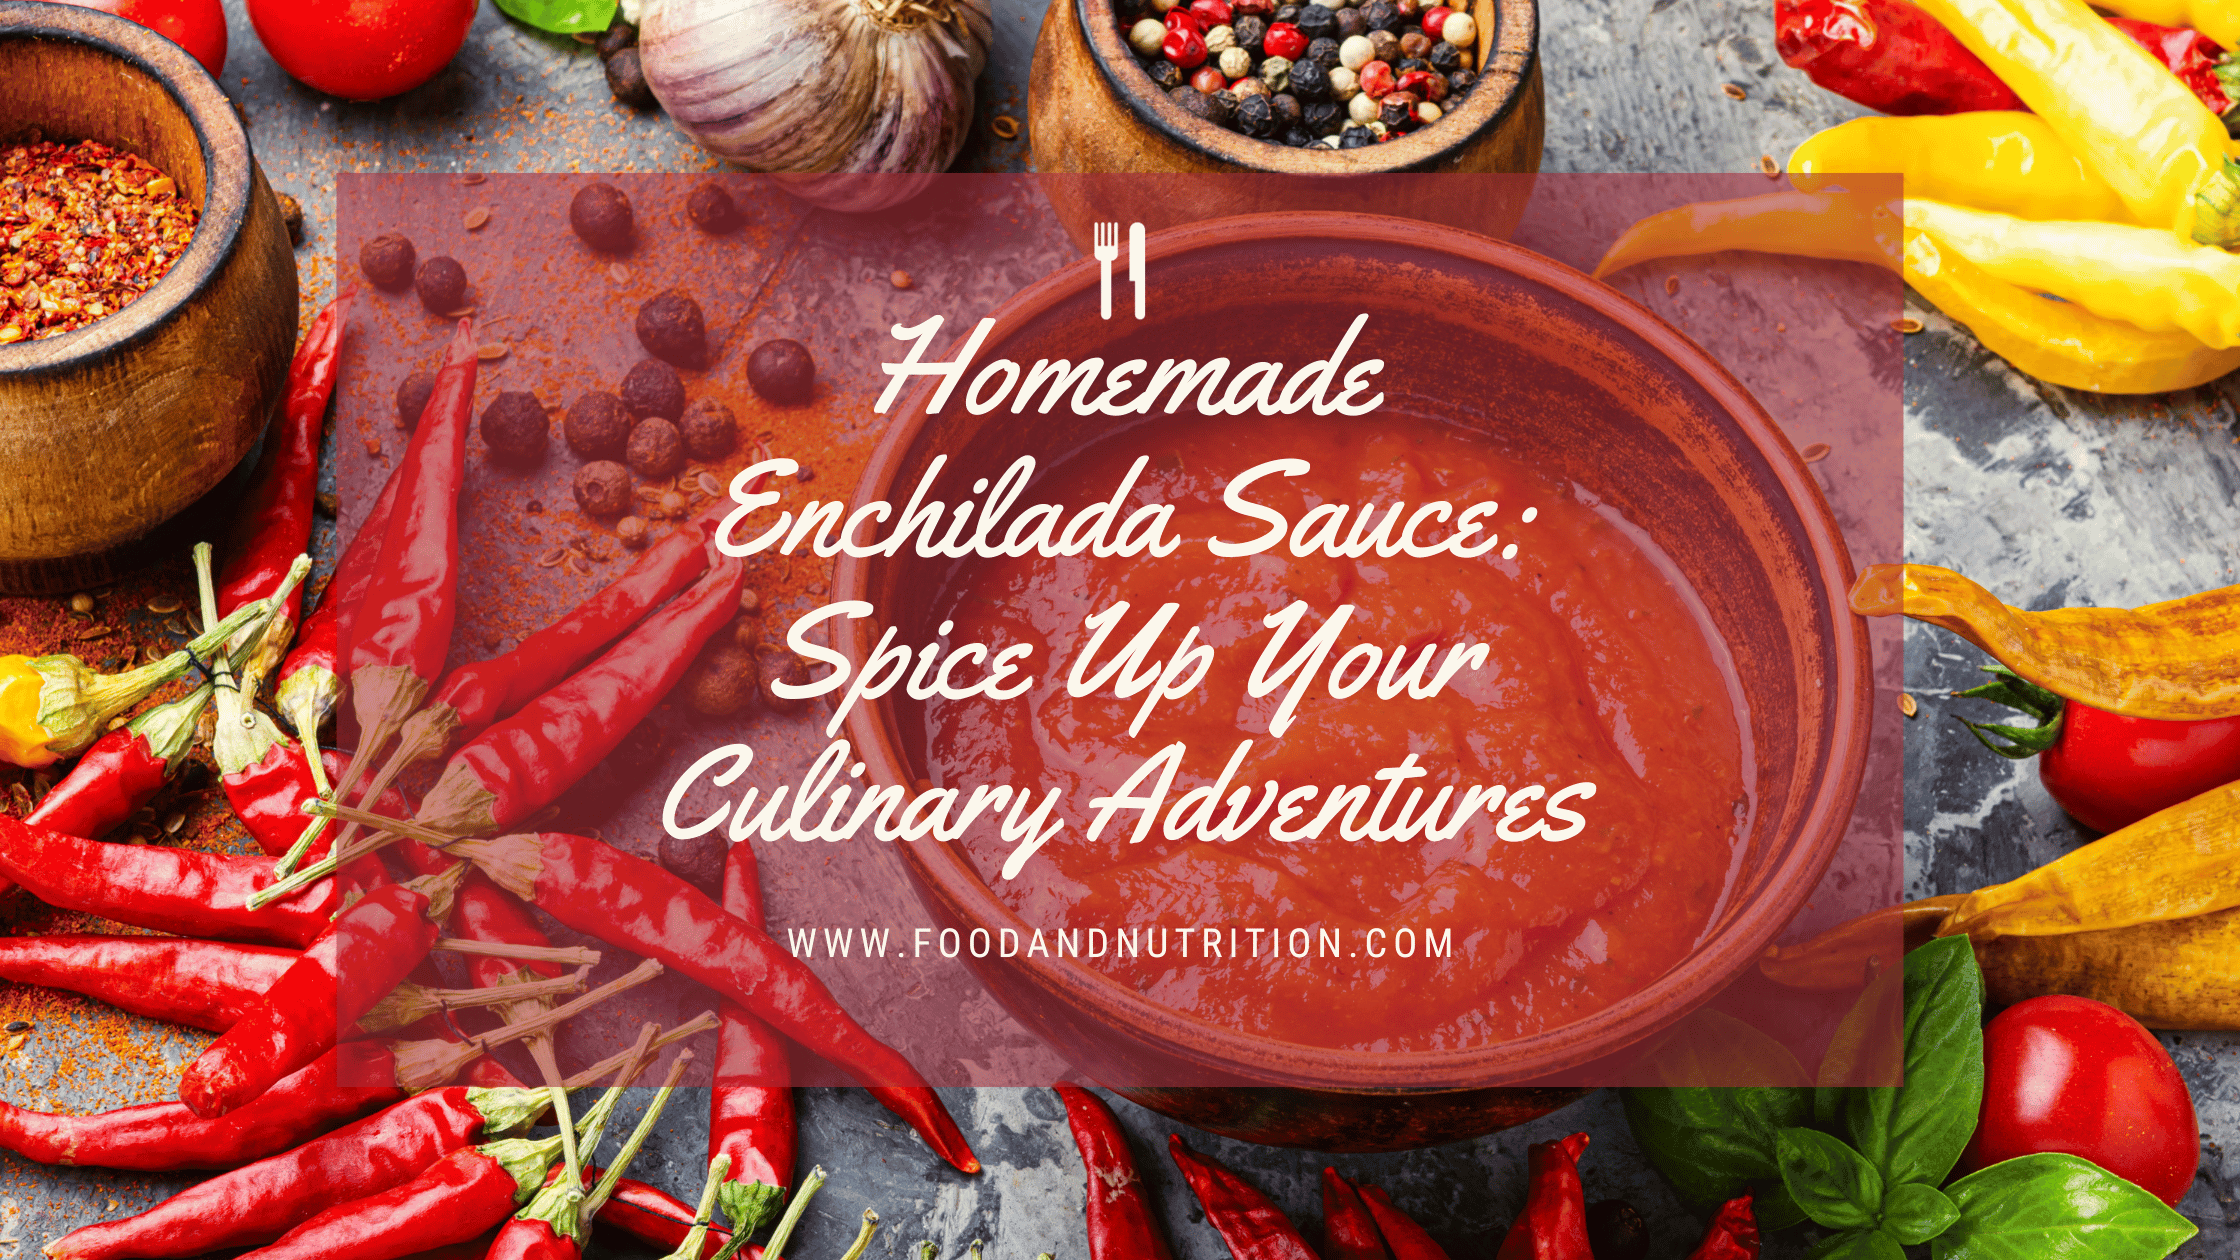 Homemade Enchilada Sauce: Spice Up Your Culinary Adventures